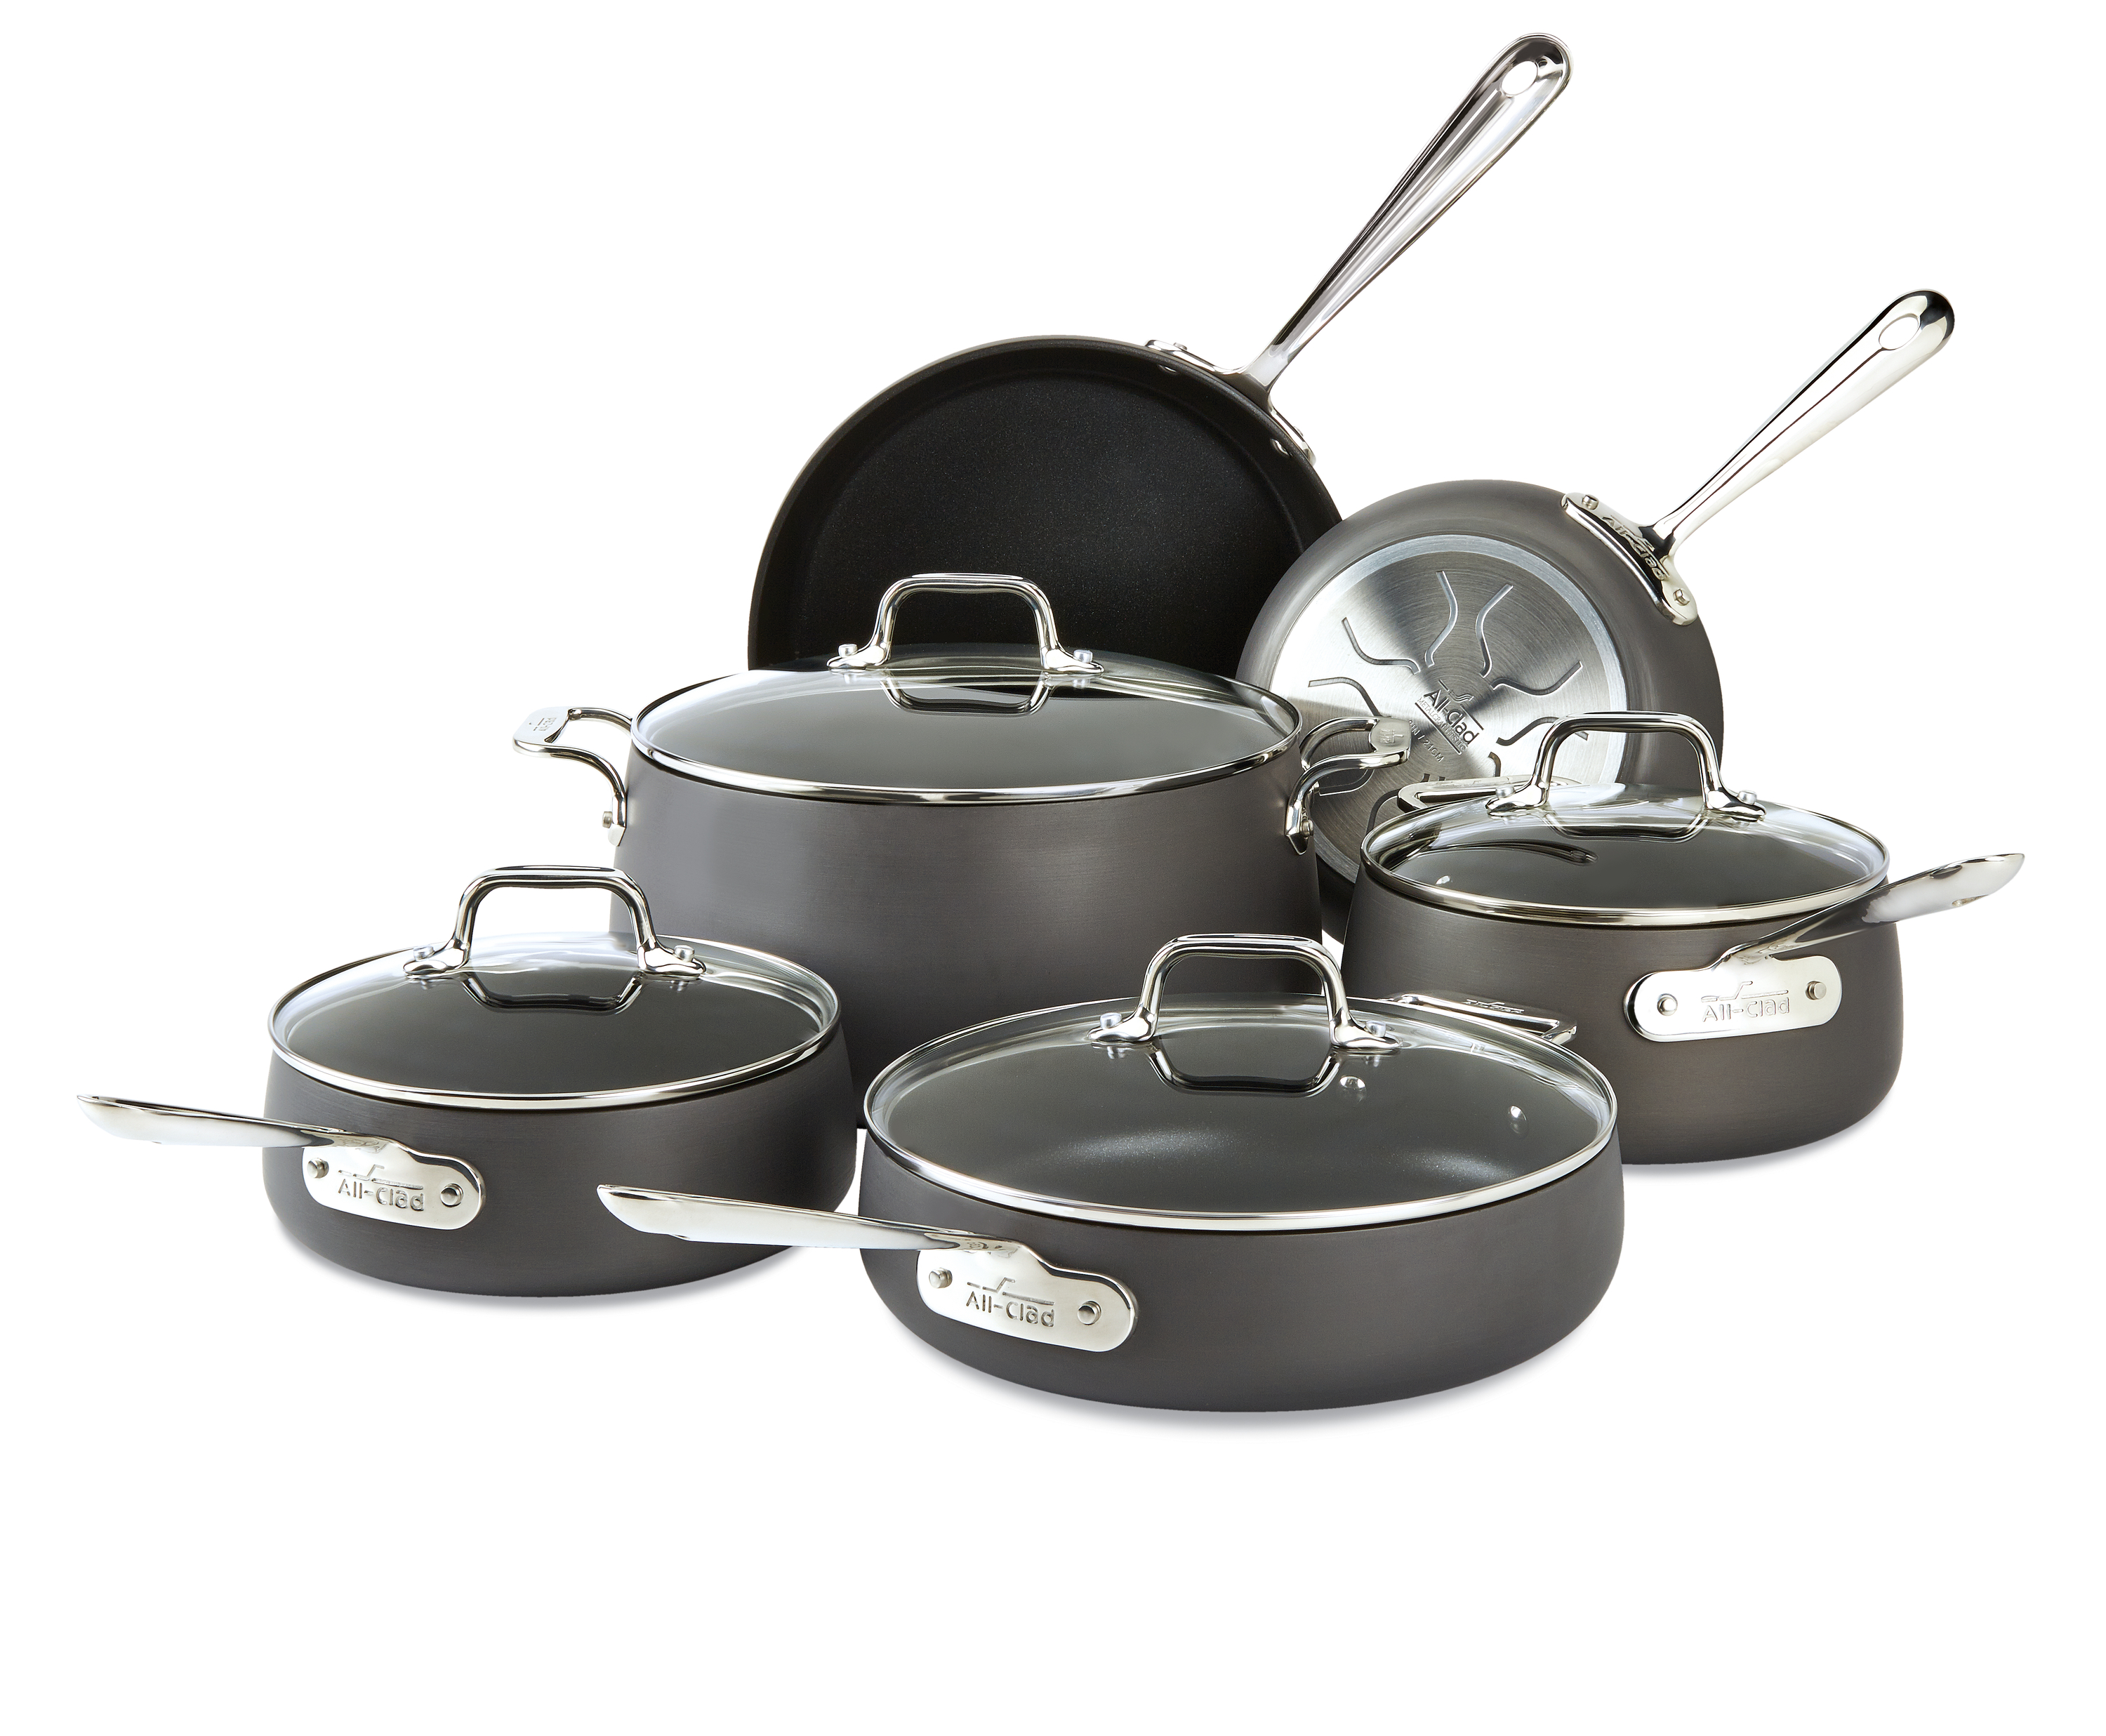 All-Clad HA1 Hard Anodized Nonstick Cookware, 10 Piece Set - image 1 of 9